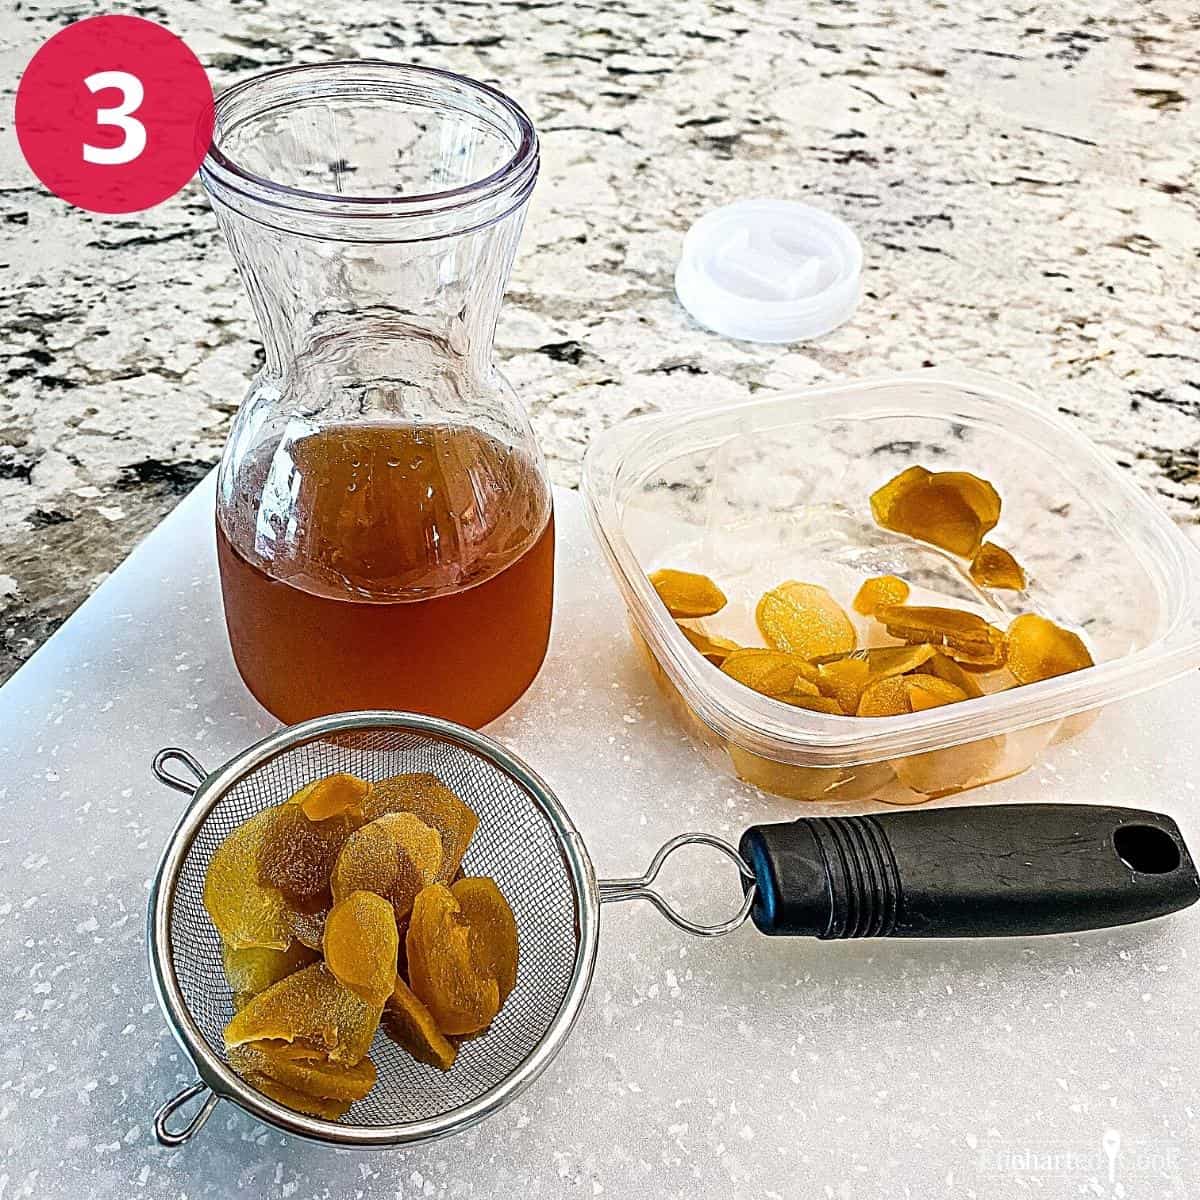 Strained ginger syrup in a carafe, slices of cooked ginger in a container, and a strainer with slices of cooked ginger.